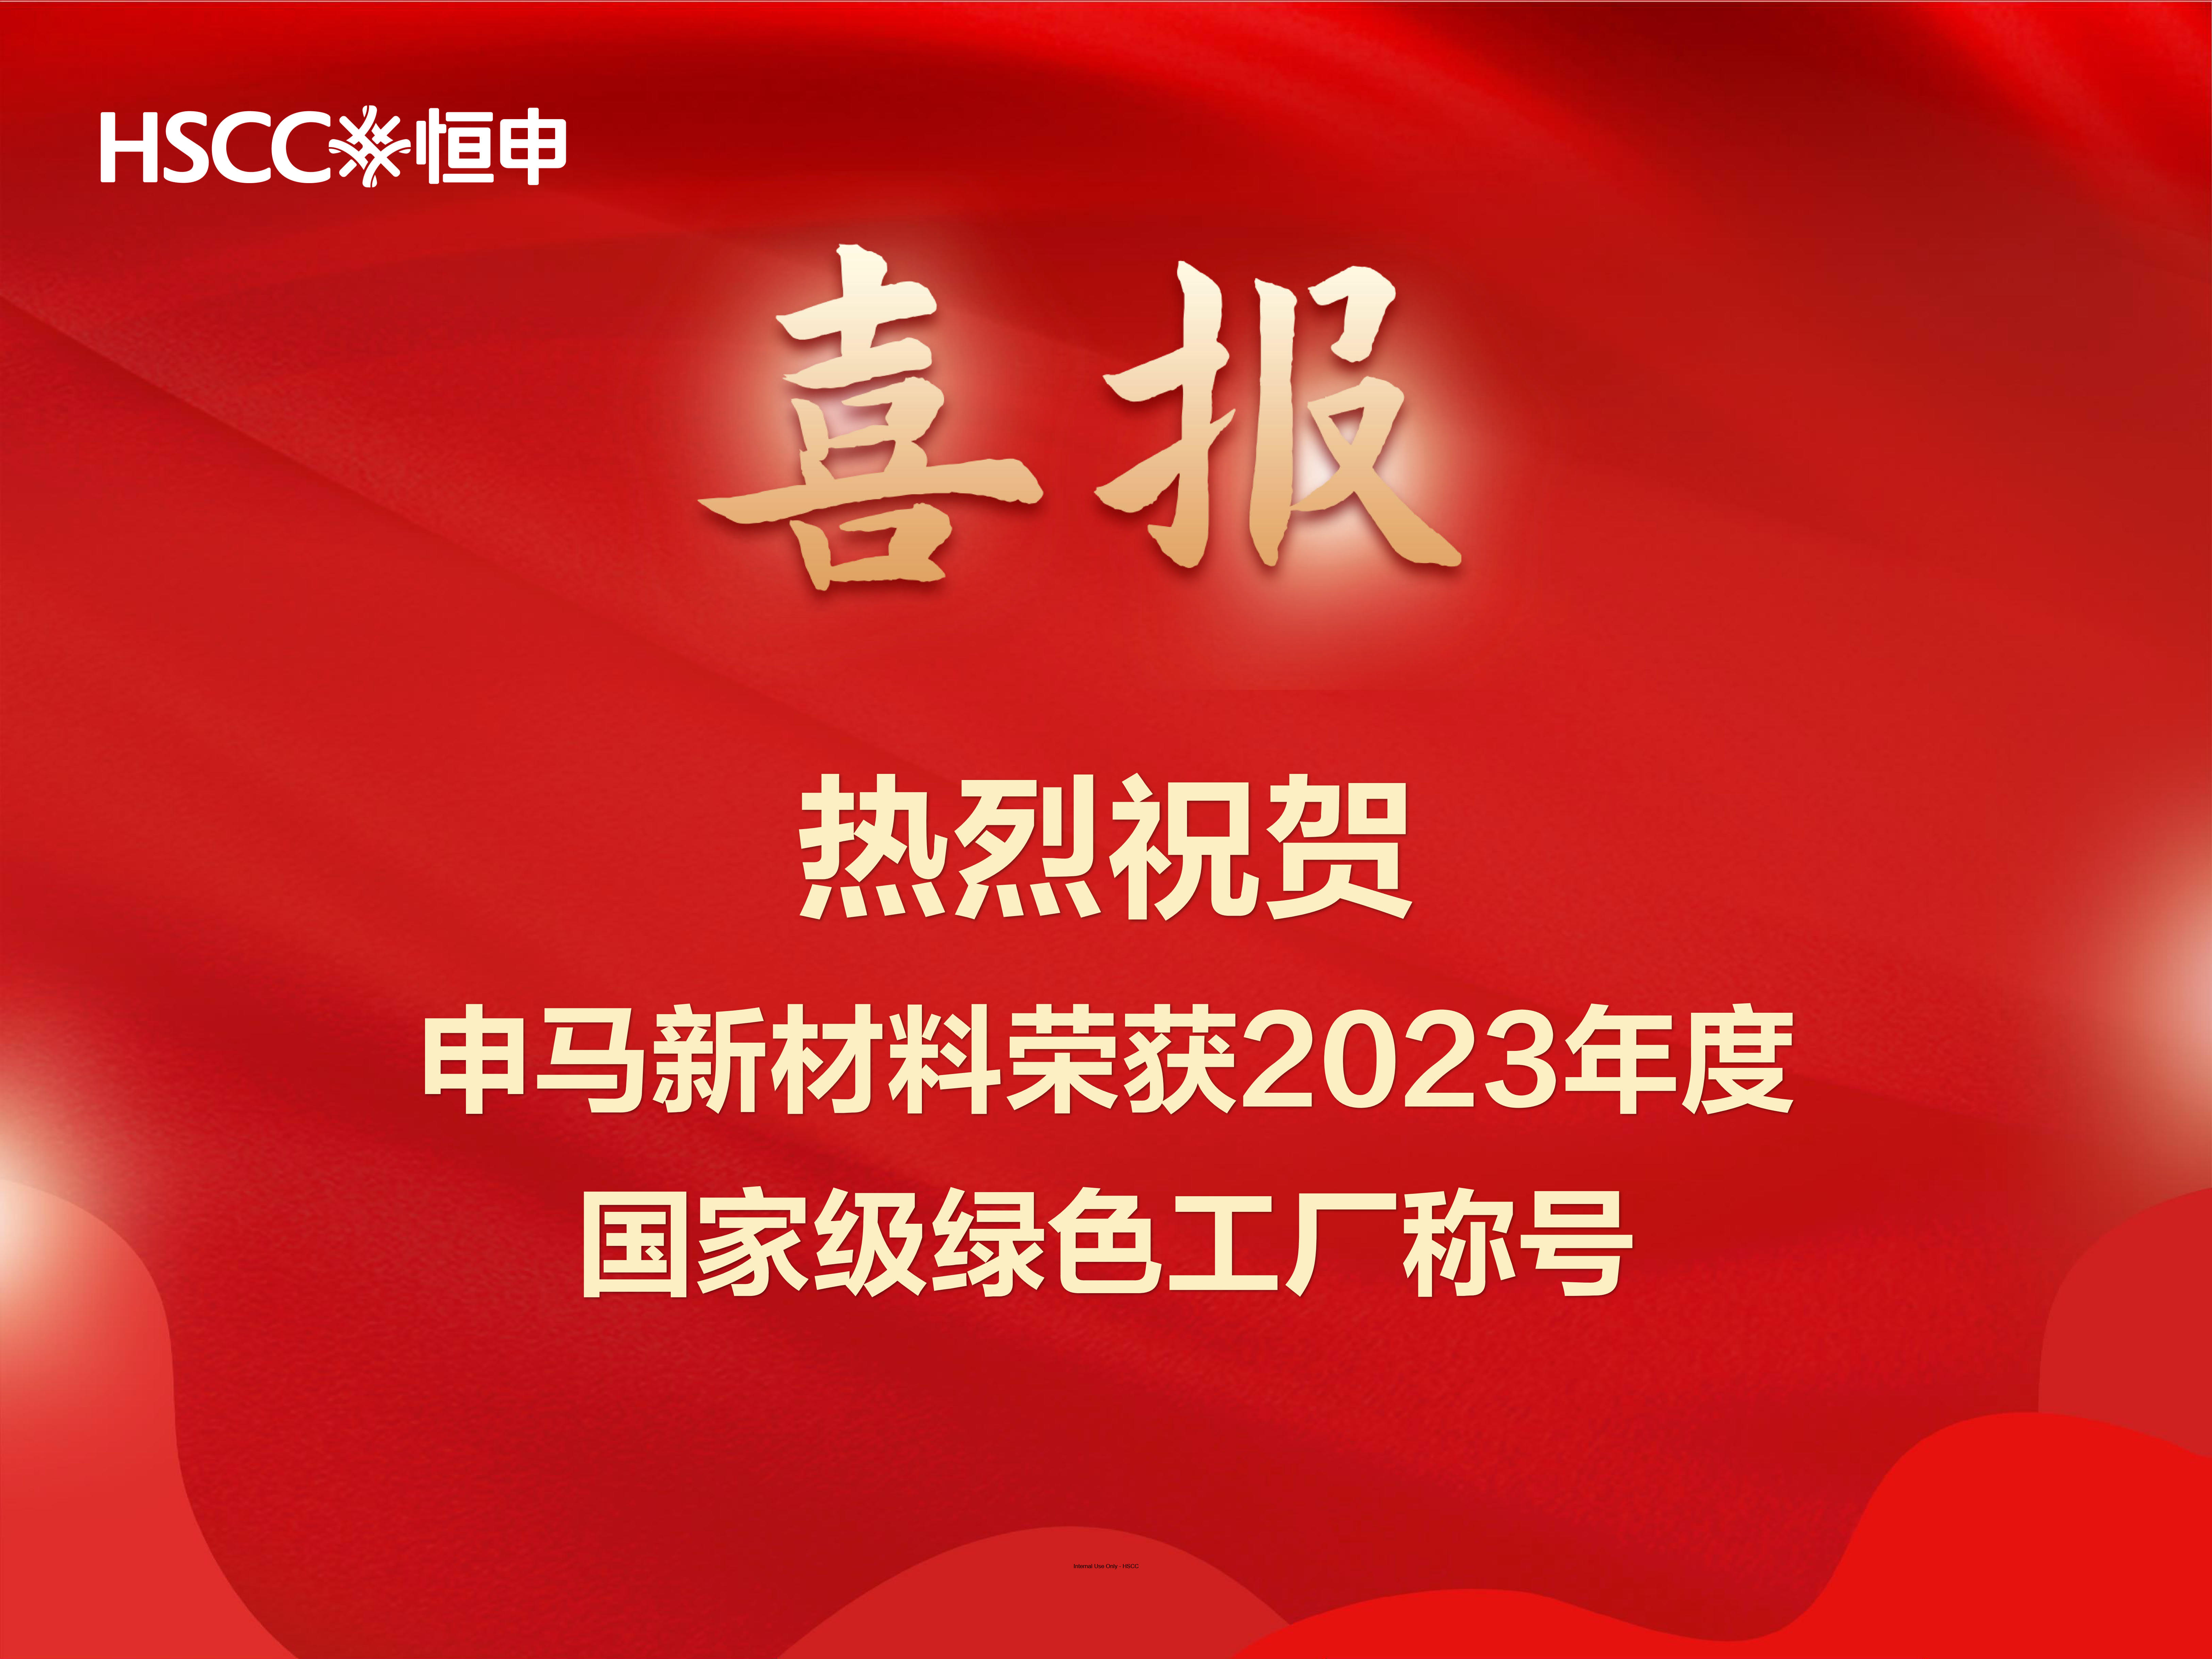 Shenma New Materials was honored as a national "Green Factory" for the year 2023